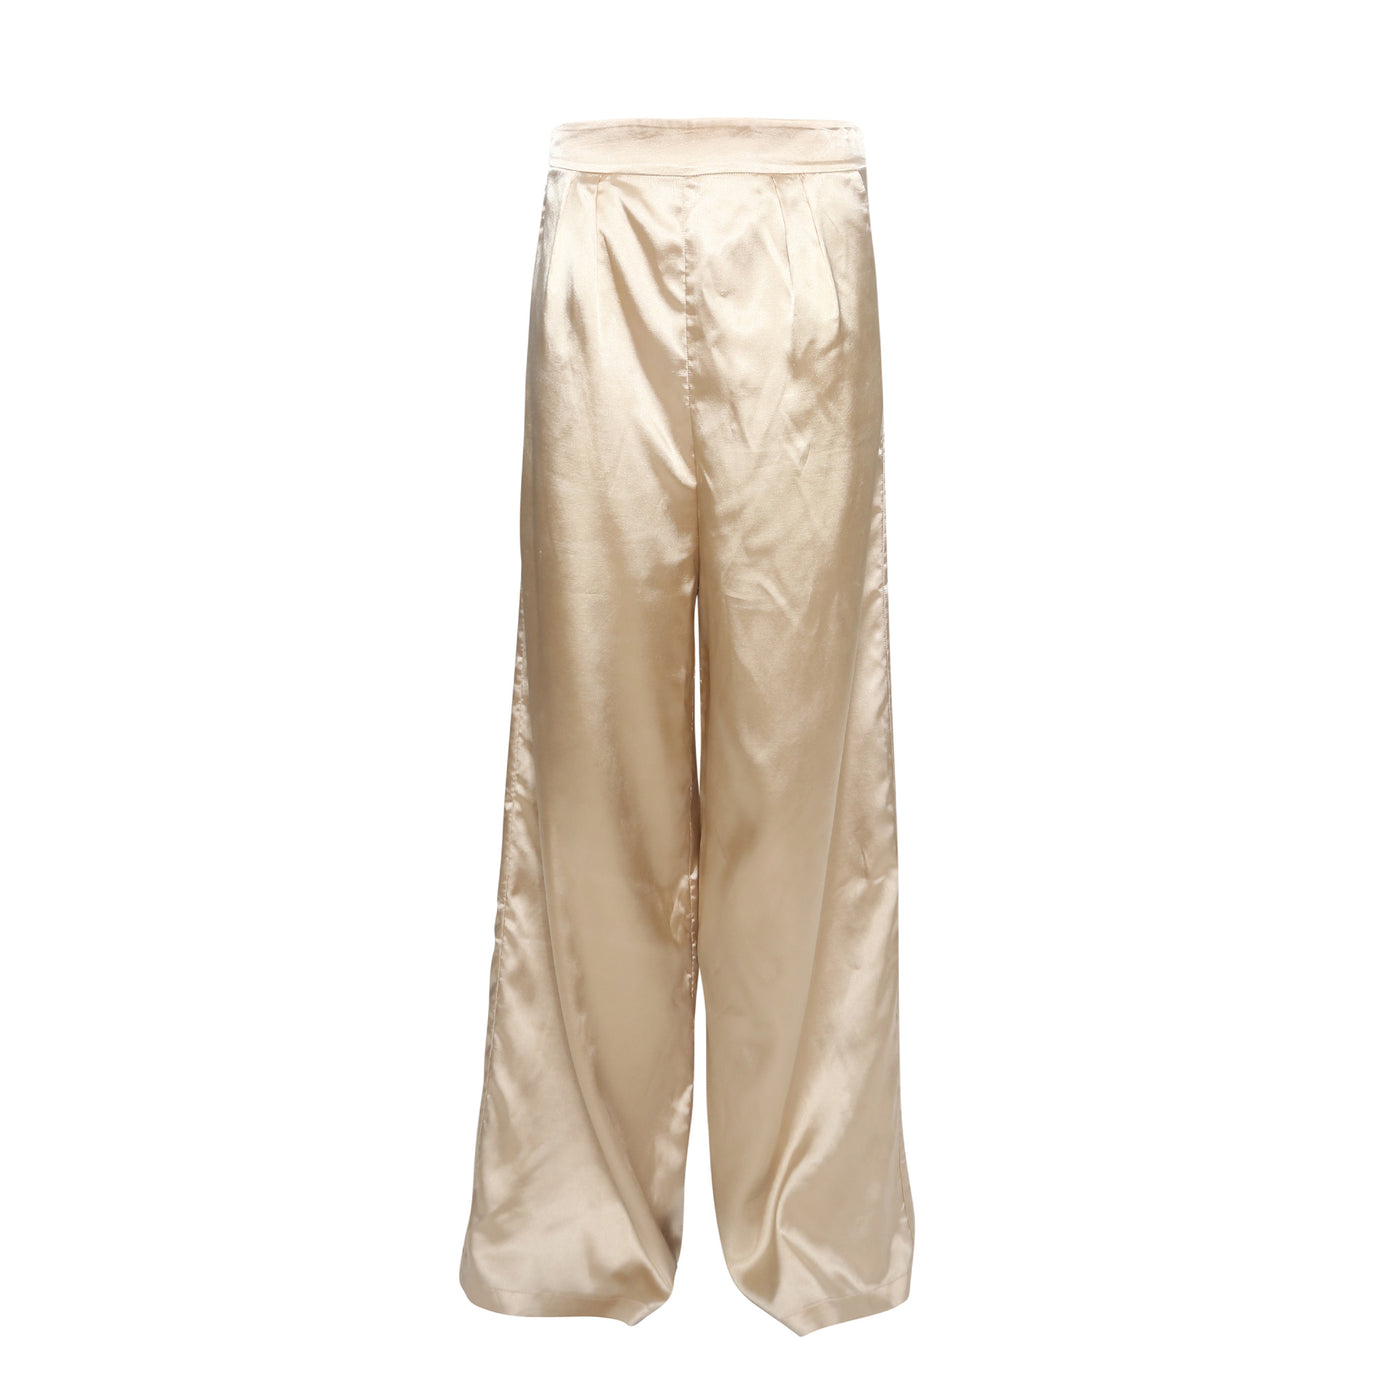 House of Harlow 1960 Champagne Pants